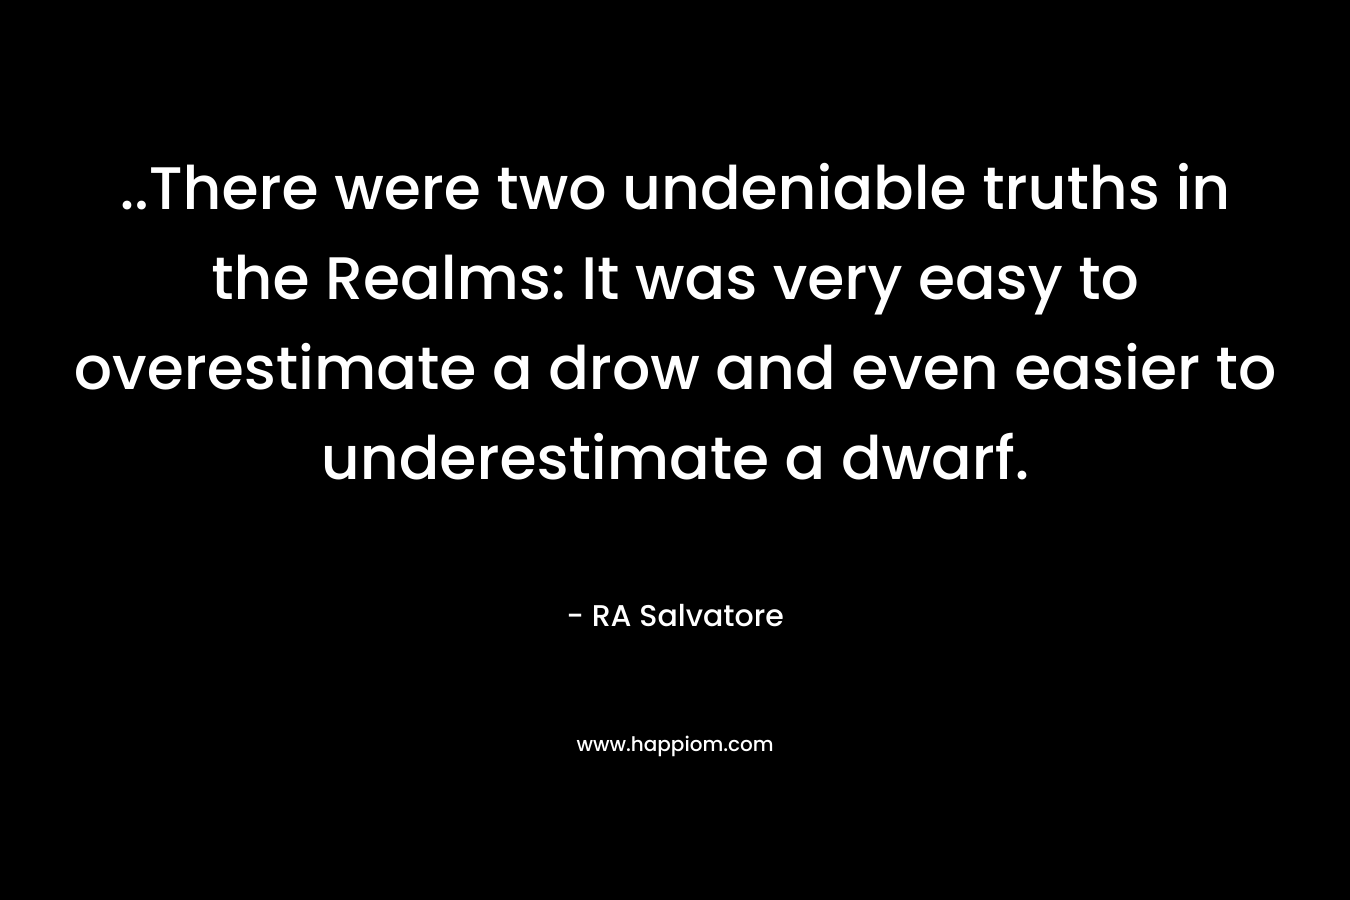 ..There were two undeniable truths in the Realms: It was very easy to overestimate a drow and even easier to underestimate a dwarf.